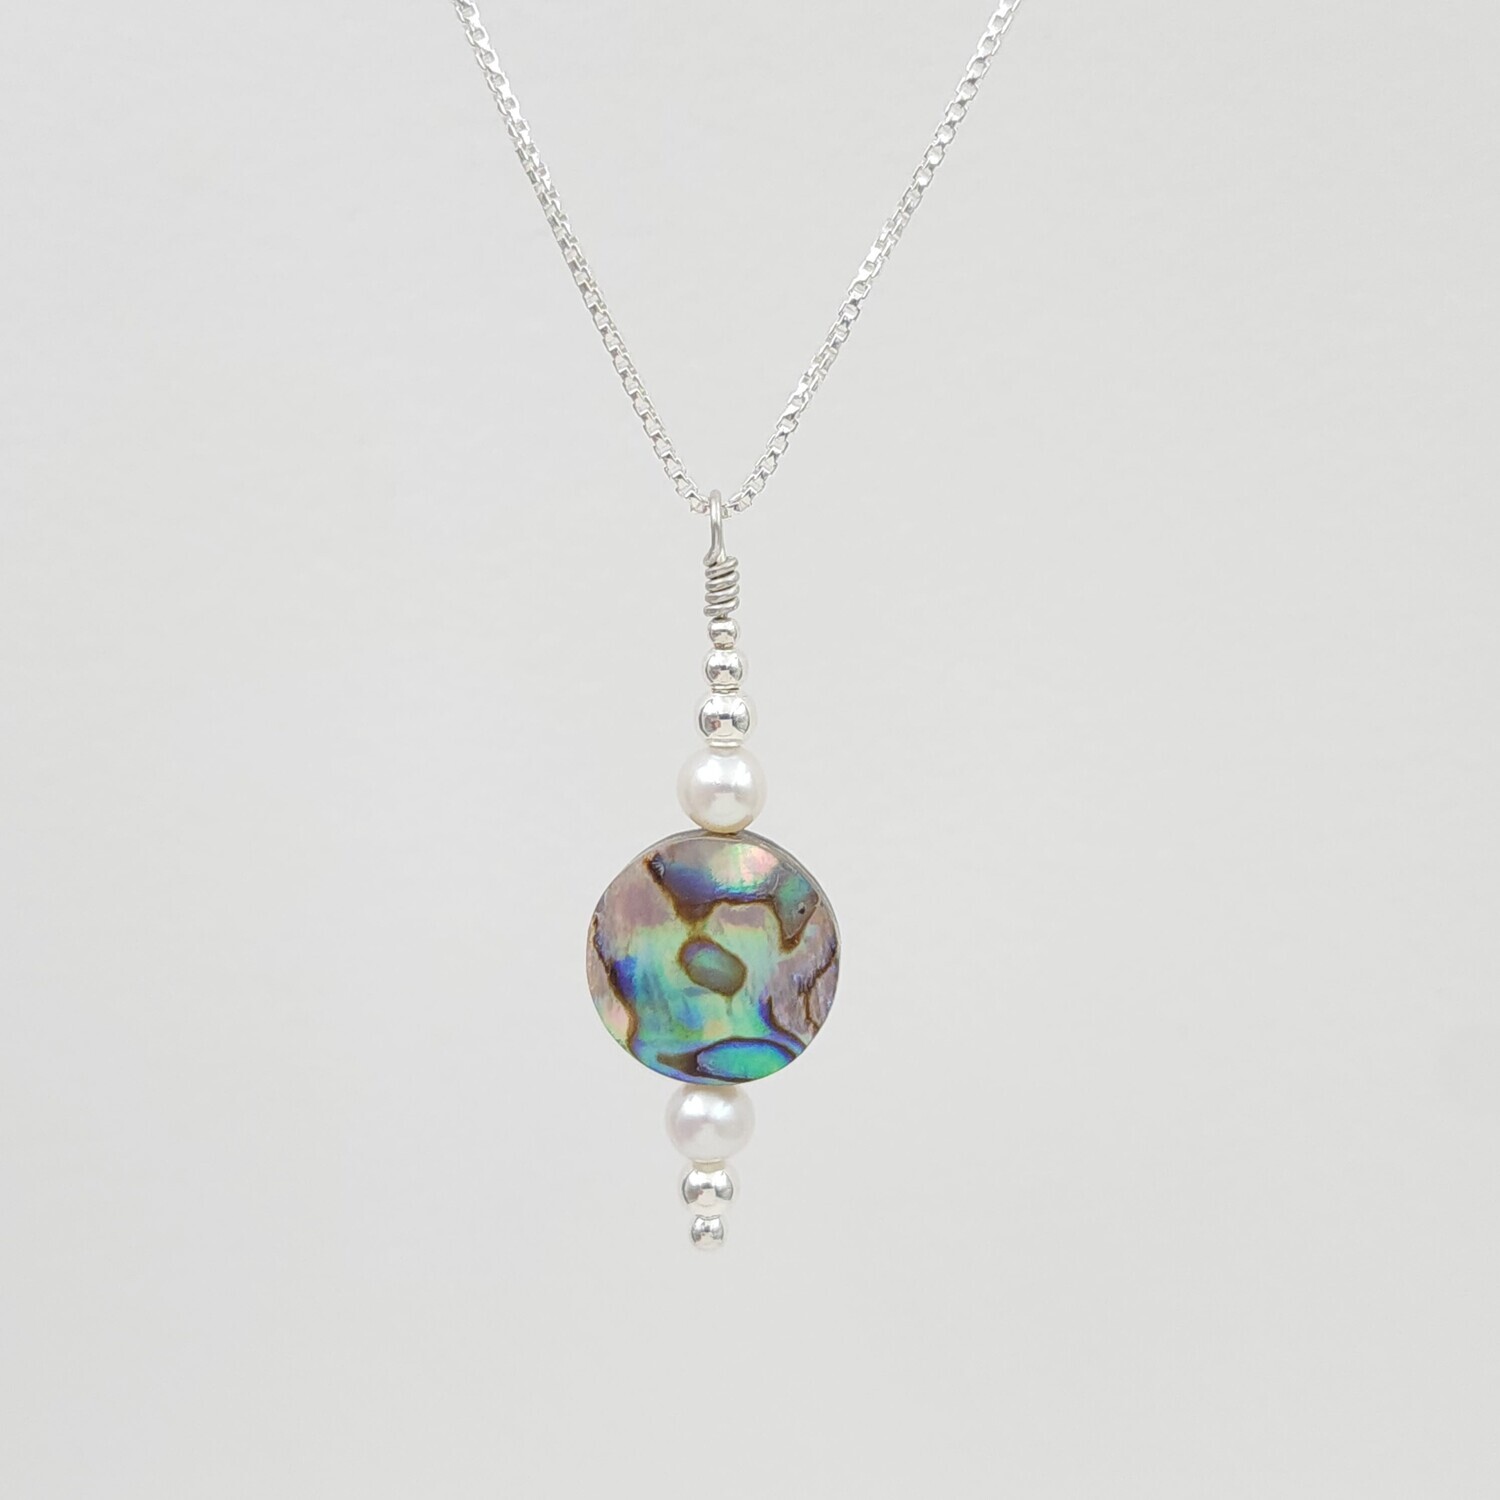 Abalone Circle Stack Necklace with Silver Beads and Freshwater Pearls